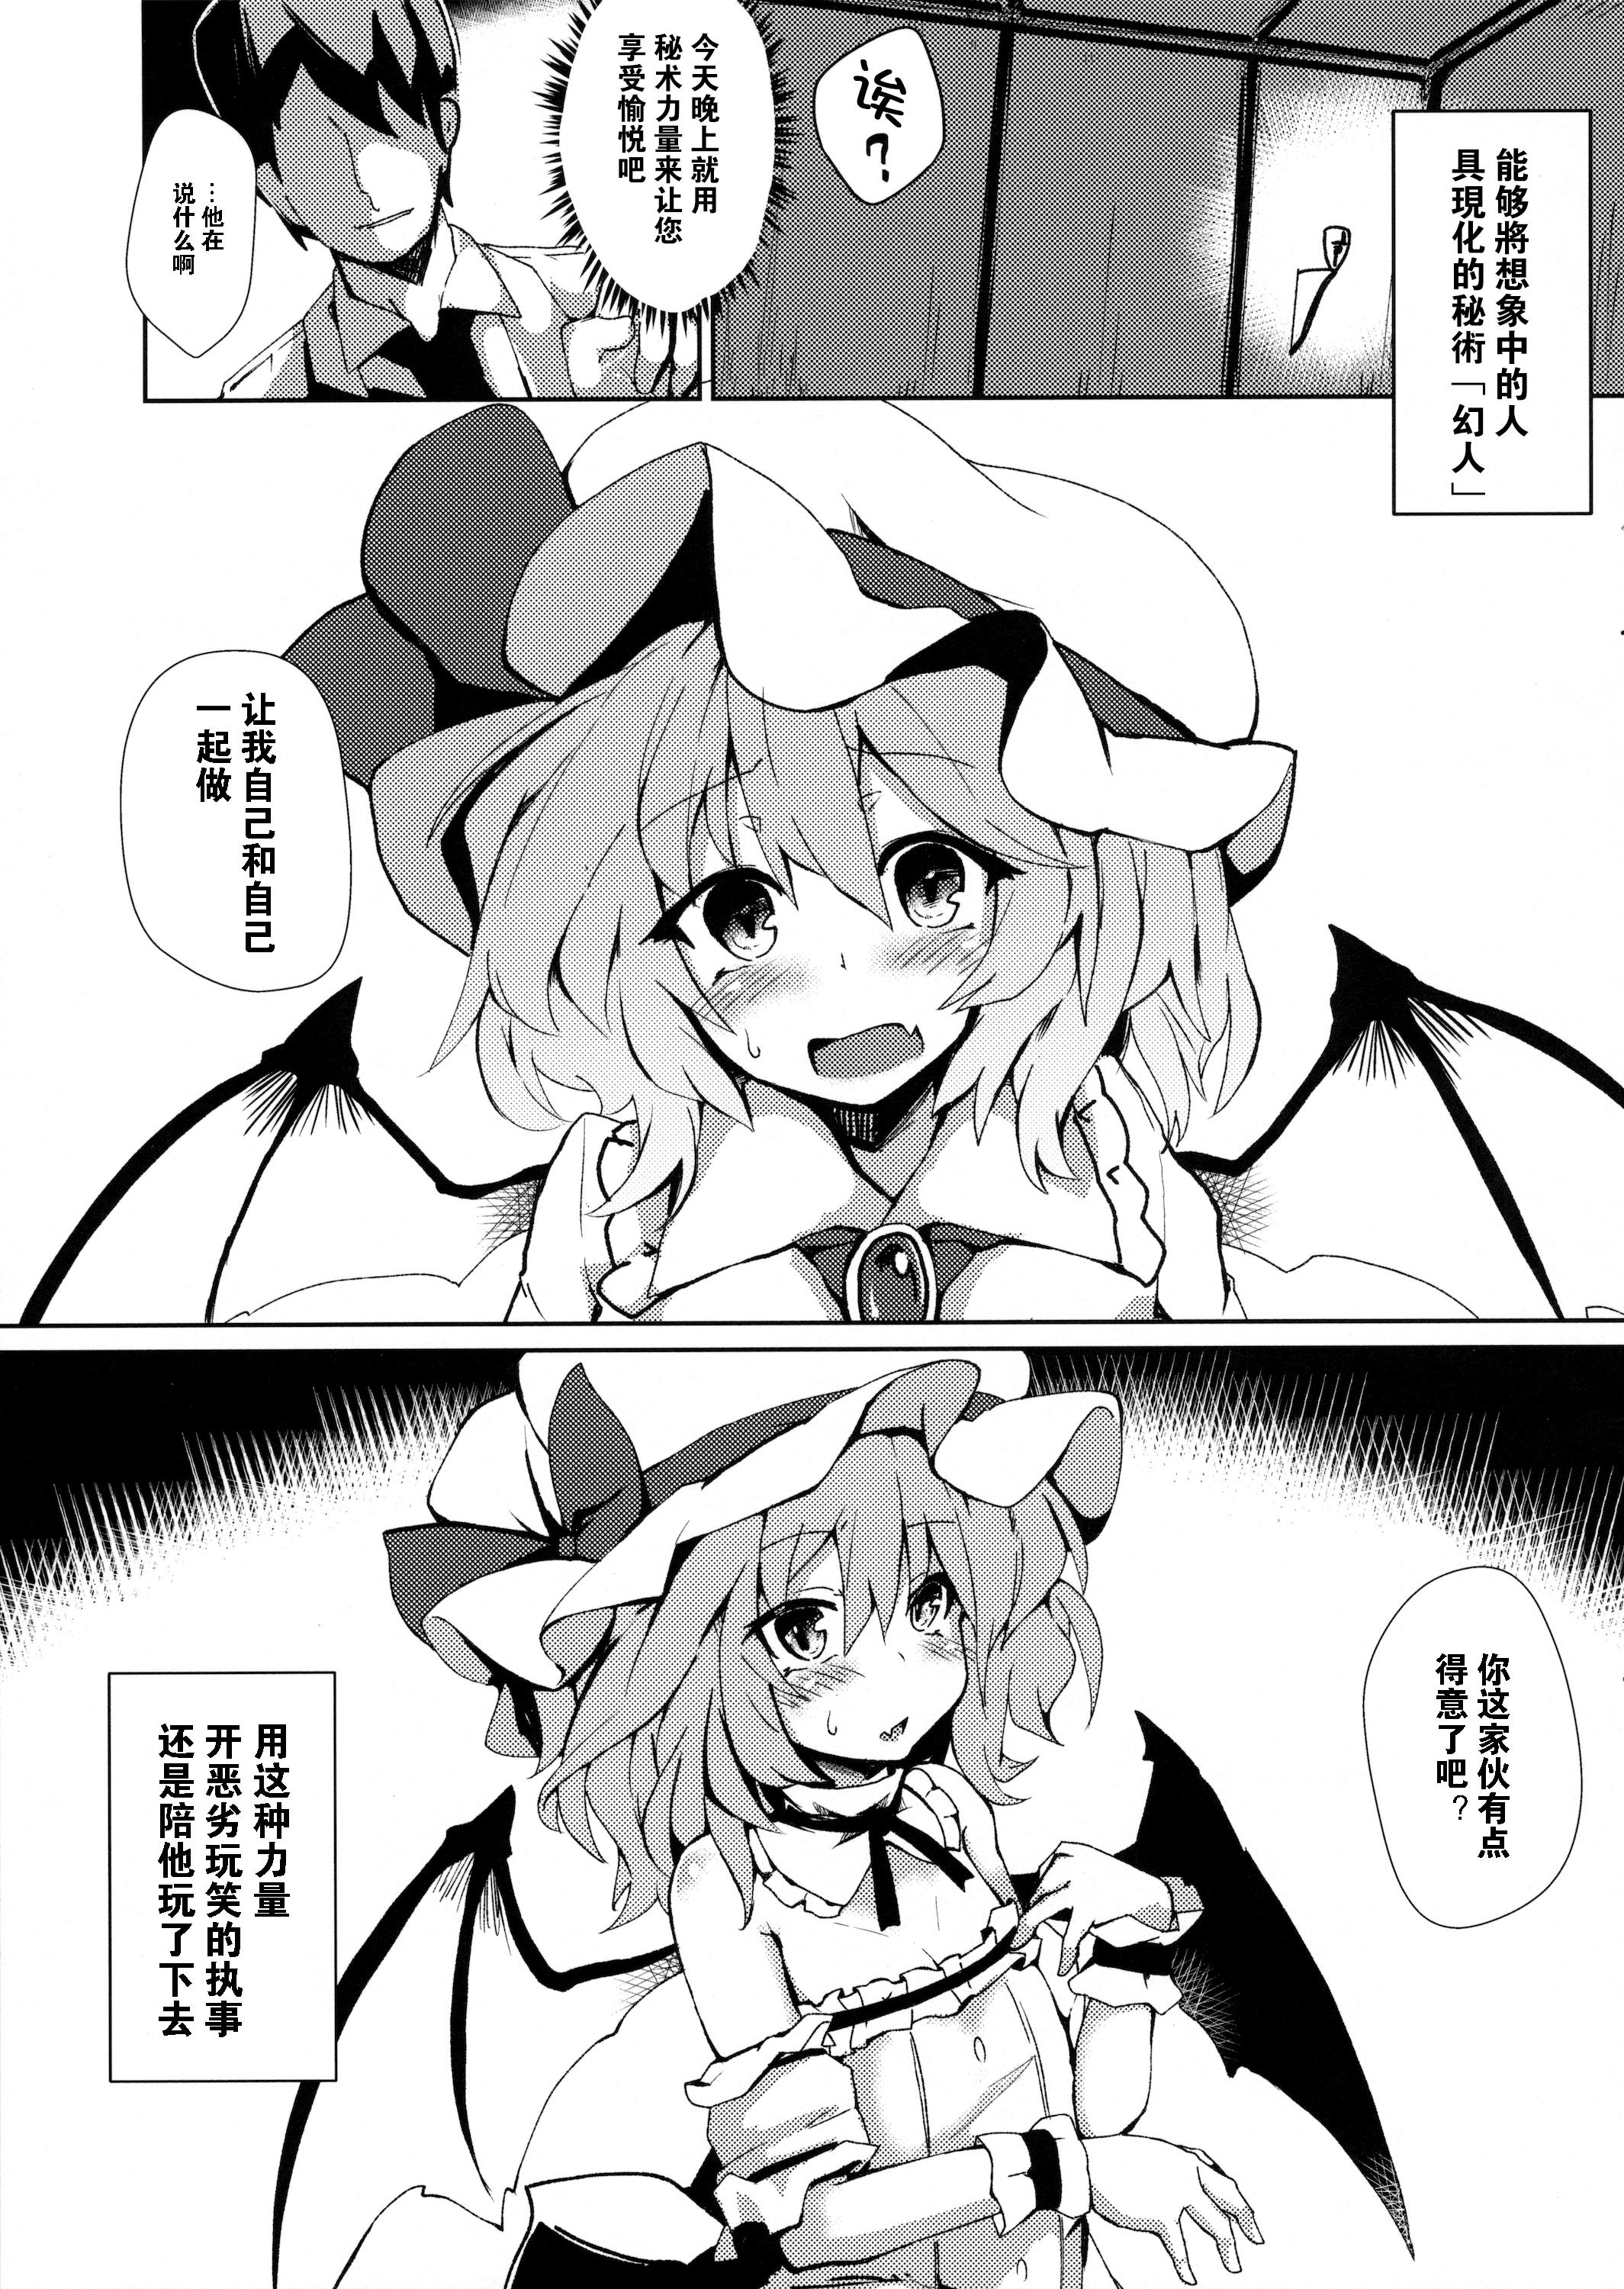 Latinas Red + Scarlet - Touhou project Outdoor Sex - Page 3